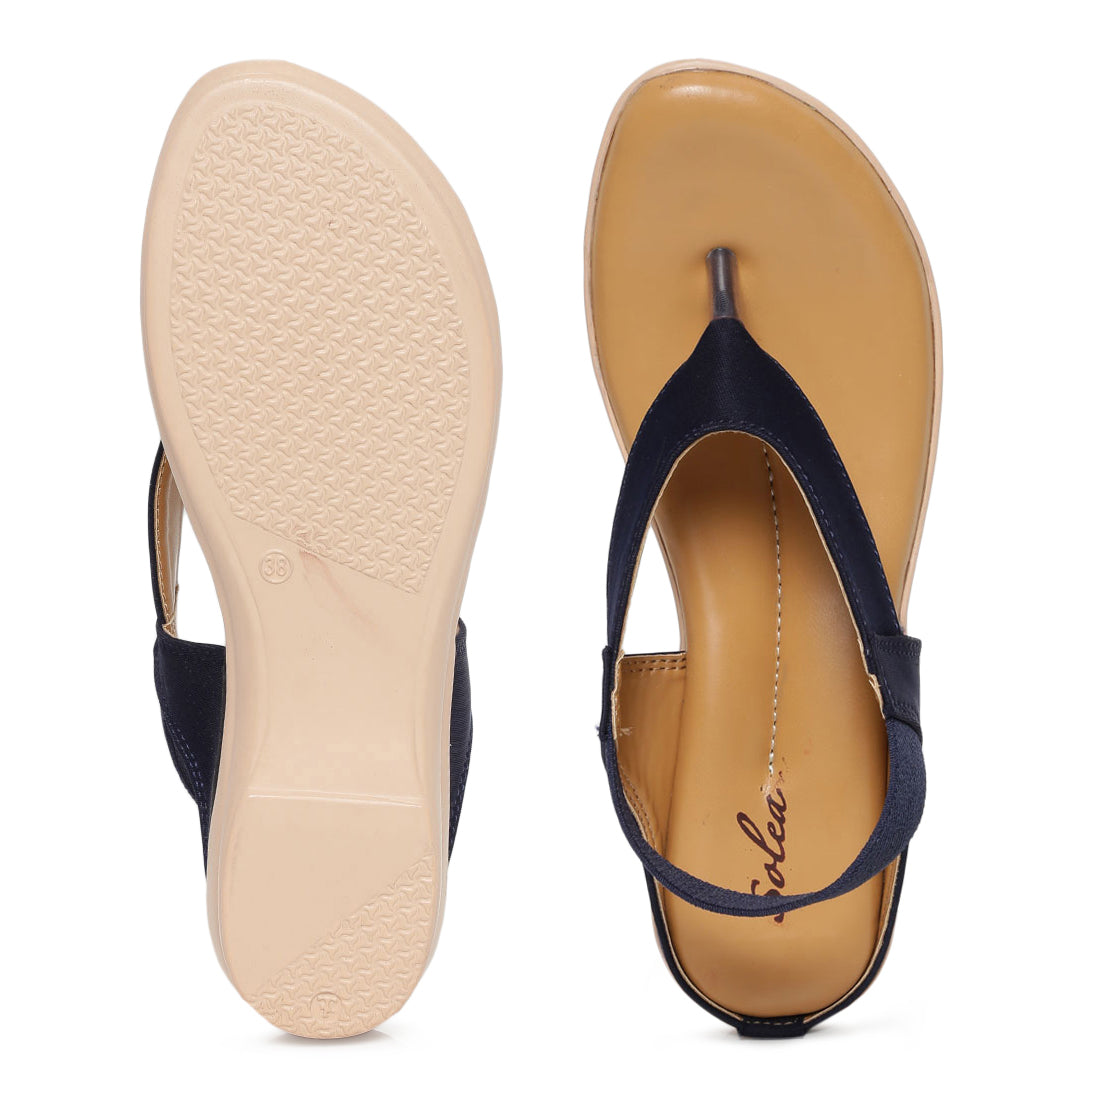 Paragon  K6007L Women Sandals | Casual &amp; Formal Sandals | Stylish, Comfortable &amp; Durable | For Daily &amp; Occasion Wear